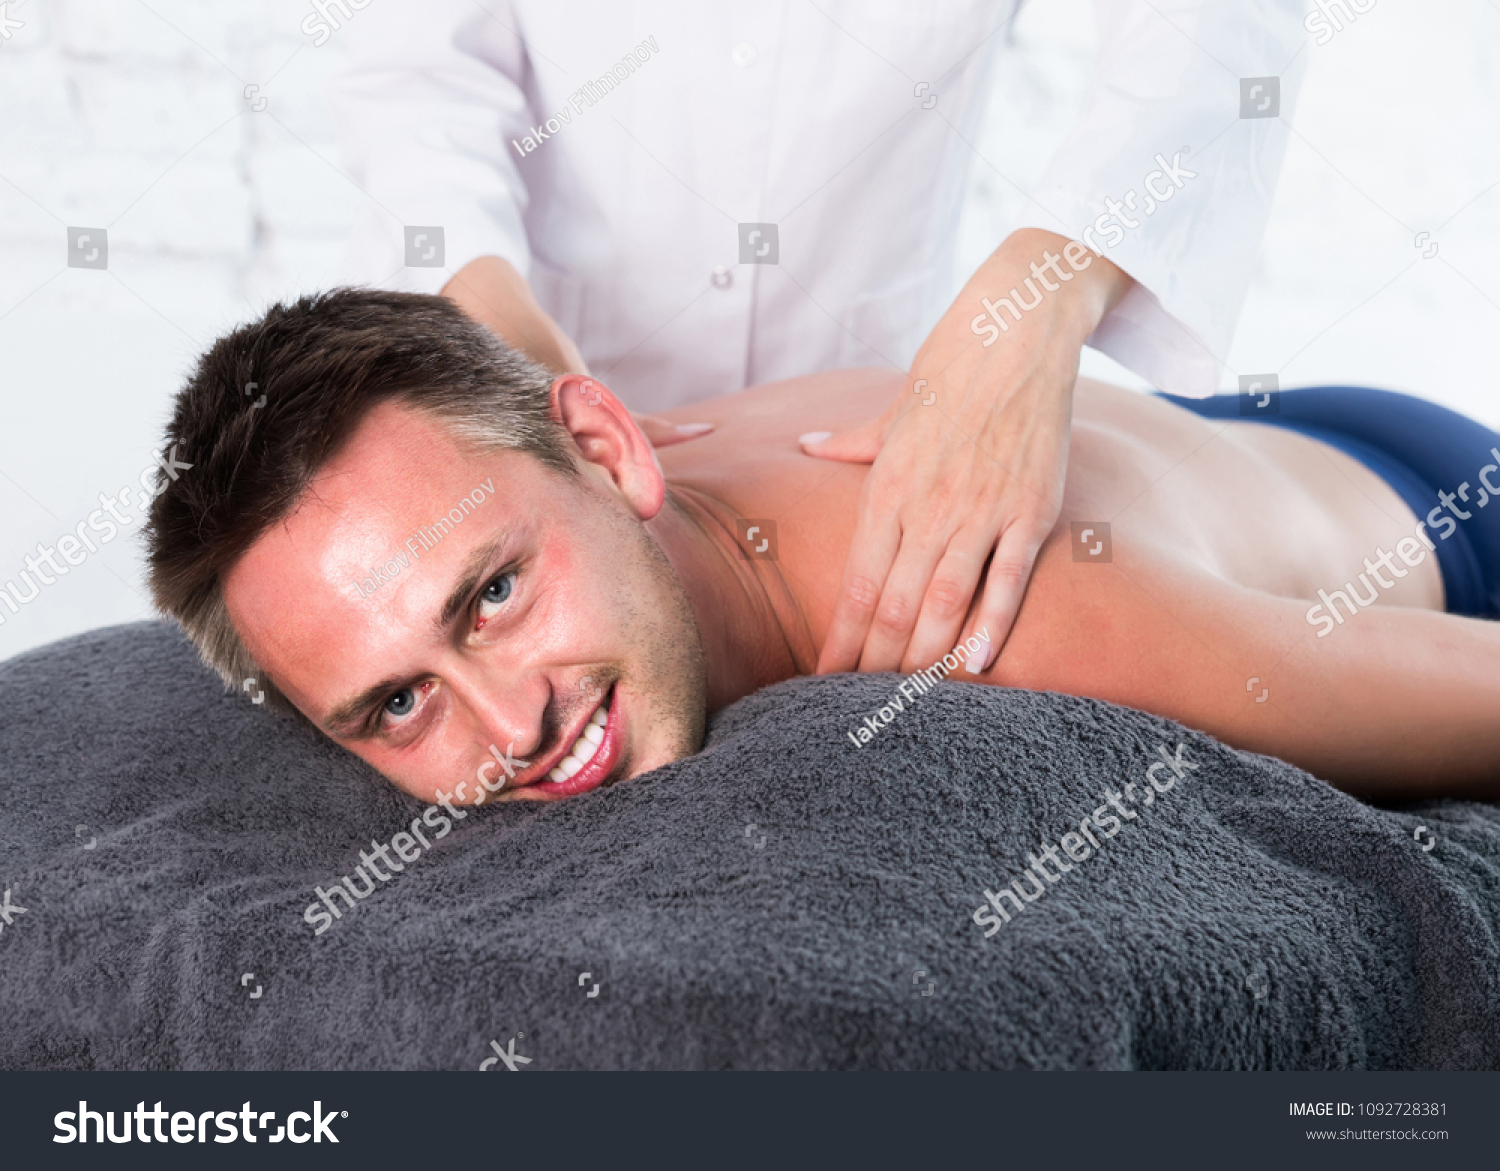 Portrait of young american man enjoying relaxing massage by professional masseuse
  #1092728381